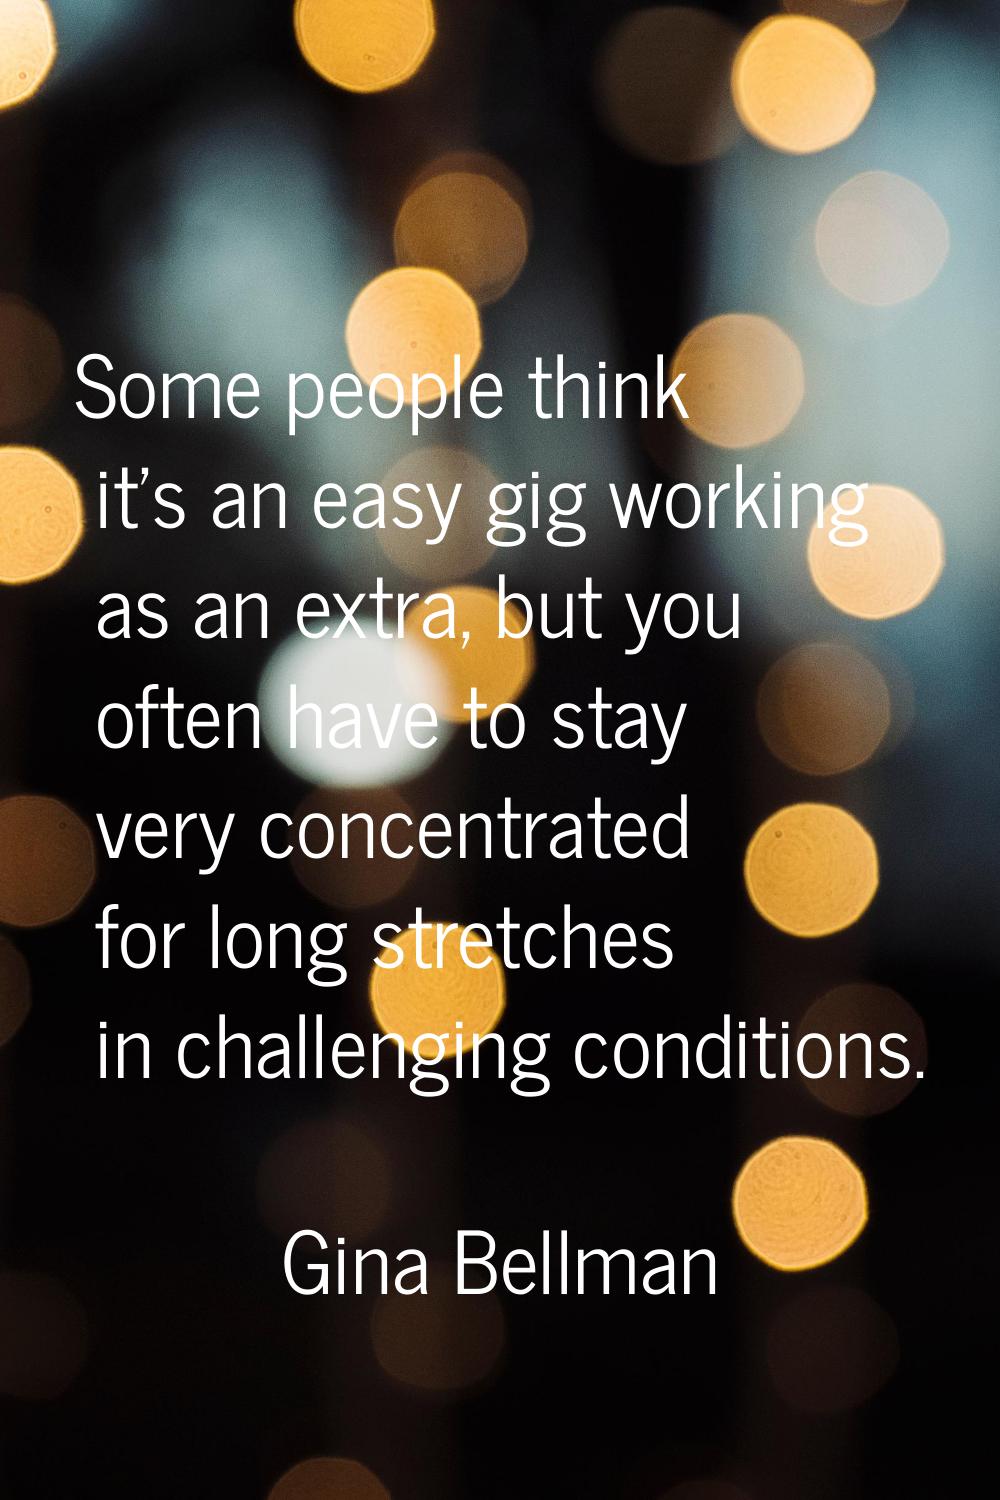 Some people think it's an easy gig working as an extra, but you often have to stay very concentrate